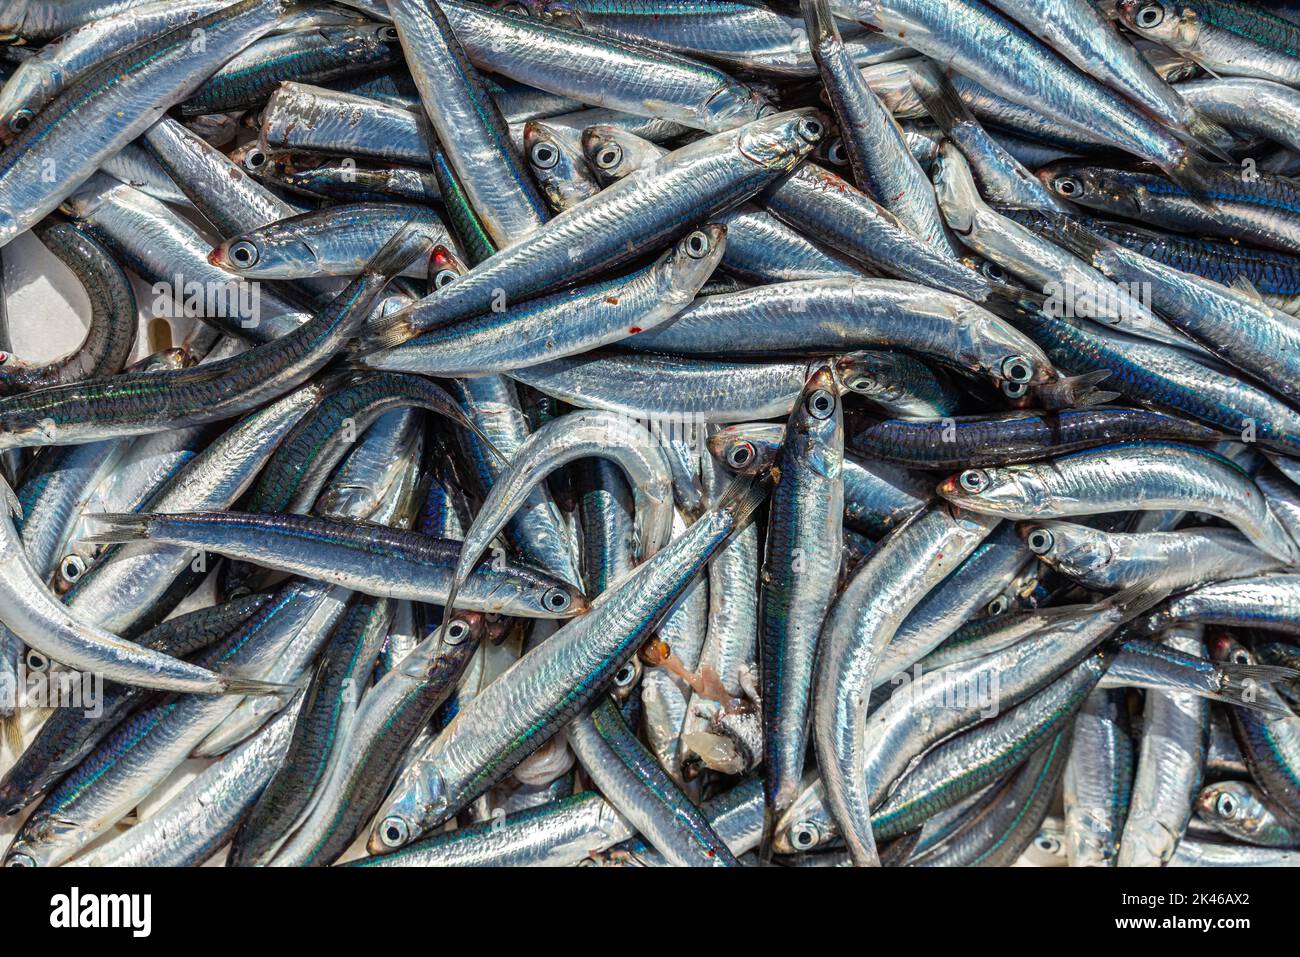 Sea food. Box of anchovies, freshly caught in the Adriatic sea, ready for sale. Gargano, Apulia, Foggia province, Italy, Europe Stock Photo